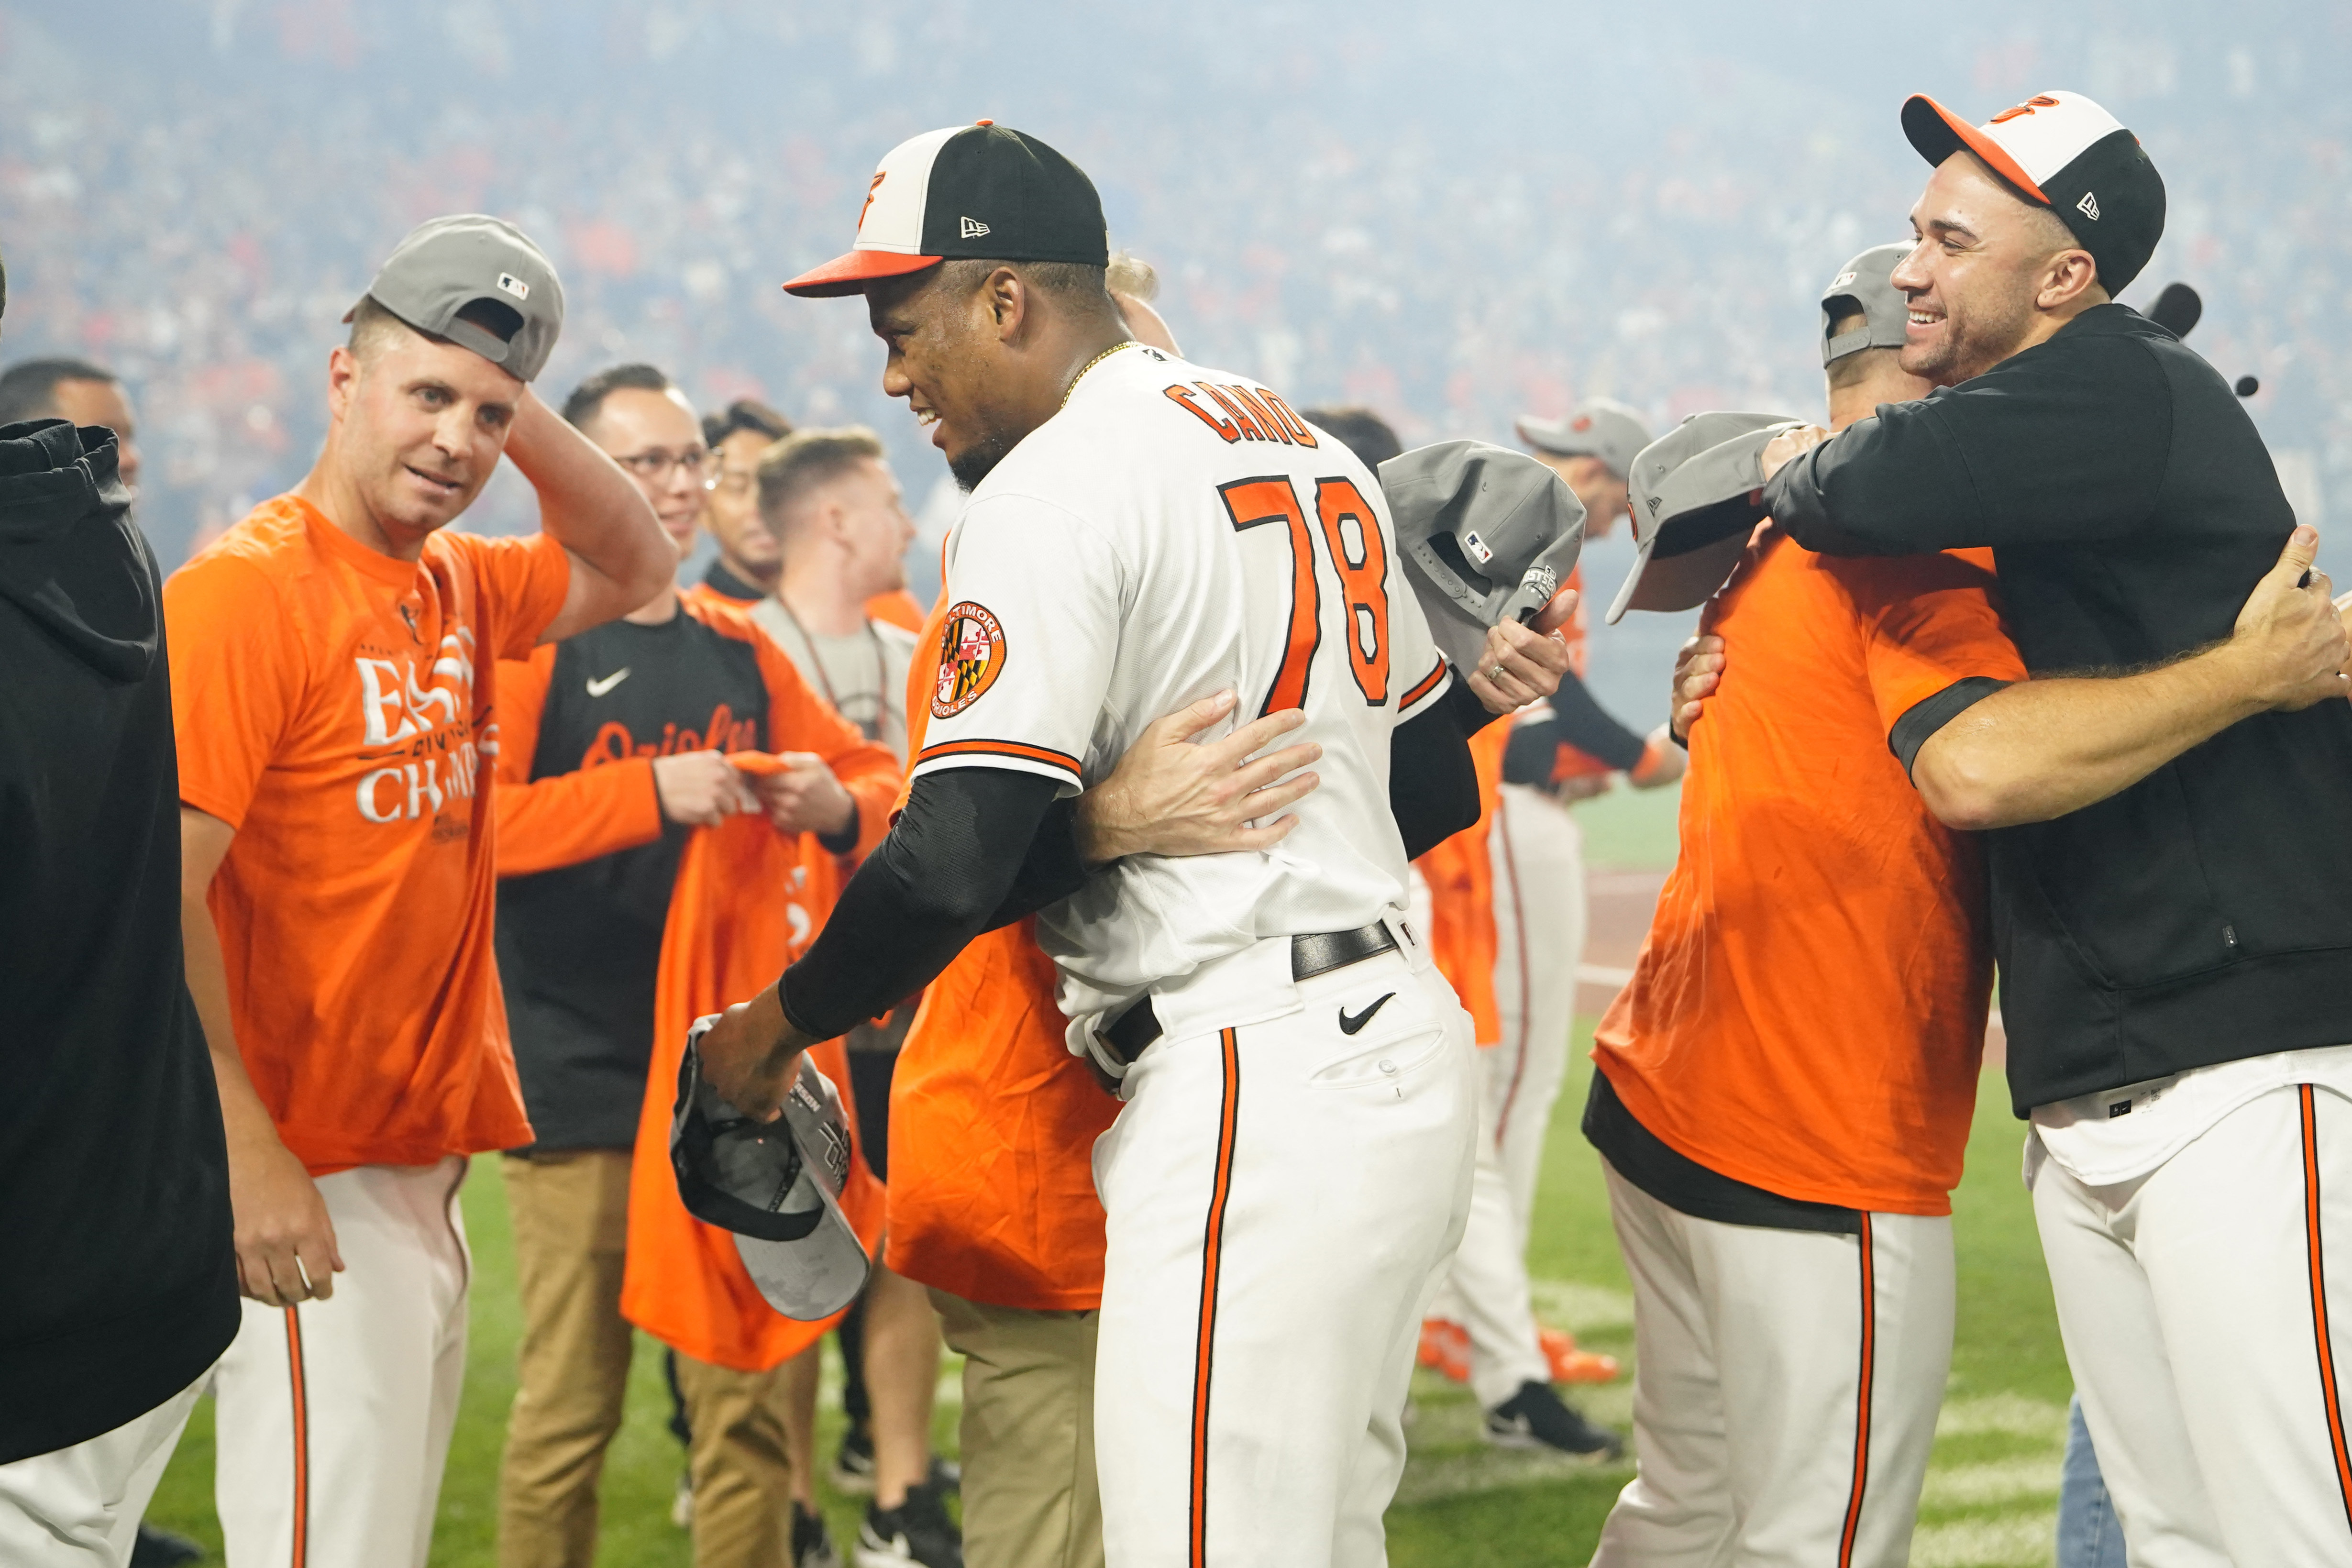 Baltimore Orioles reach agreement on 30-year lease that will keep